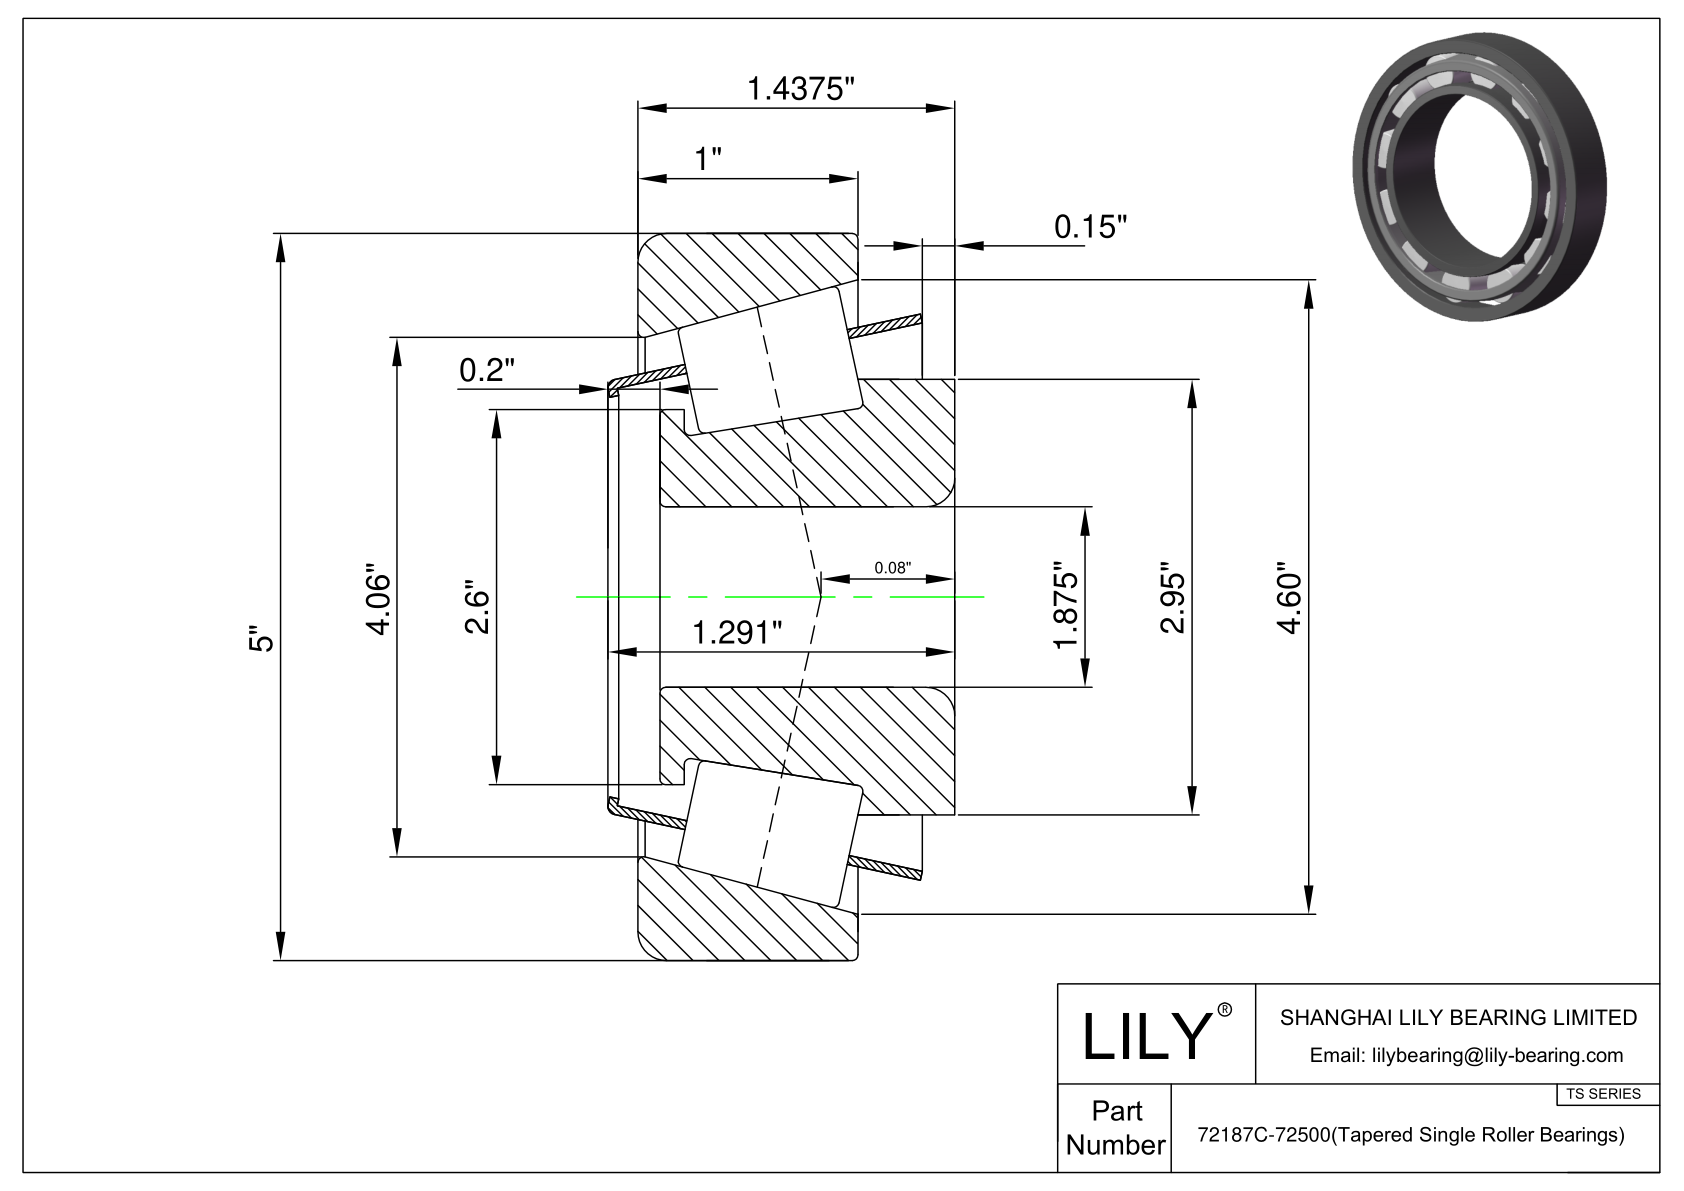 72187C-72500 TS (Tapered Single Roller Bearings) (Imperial) cad drawing